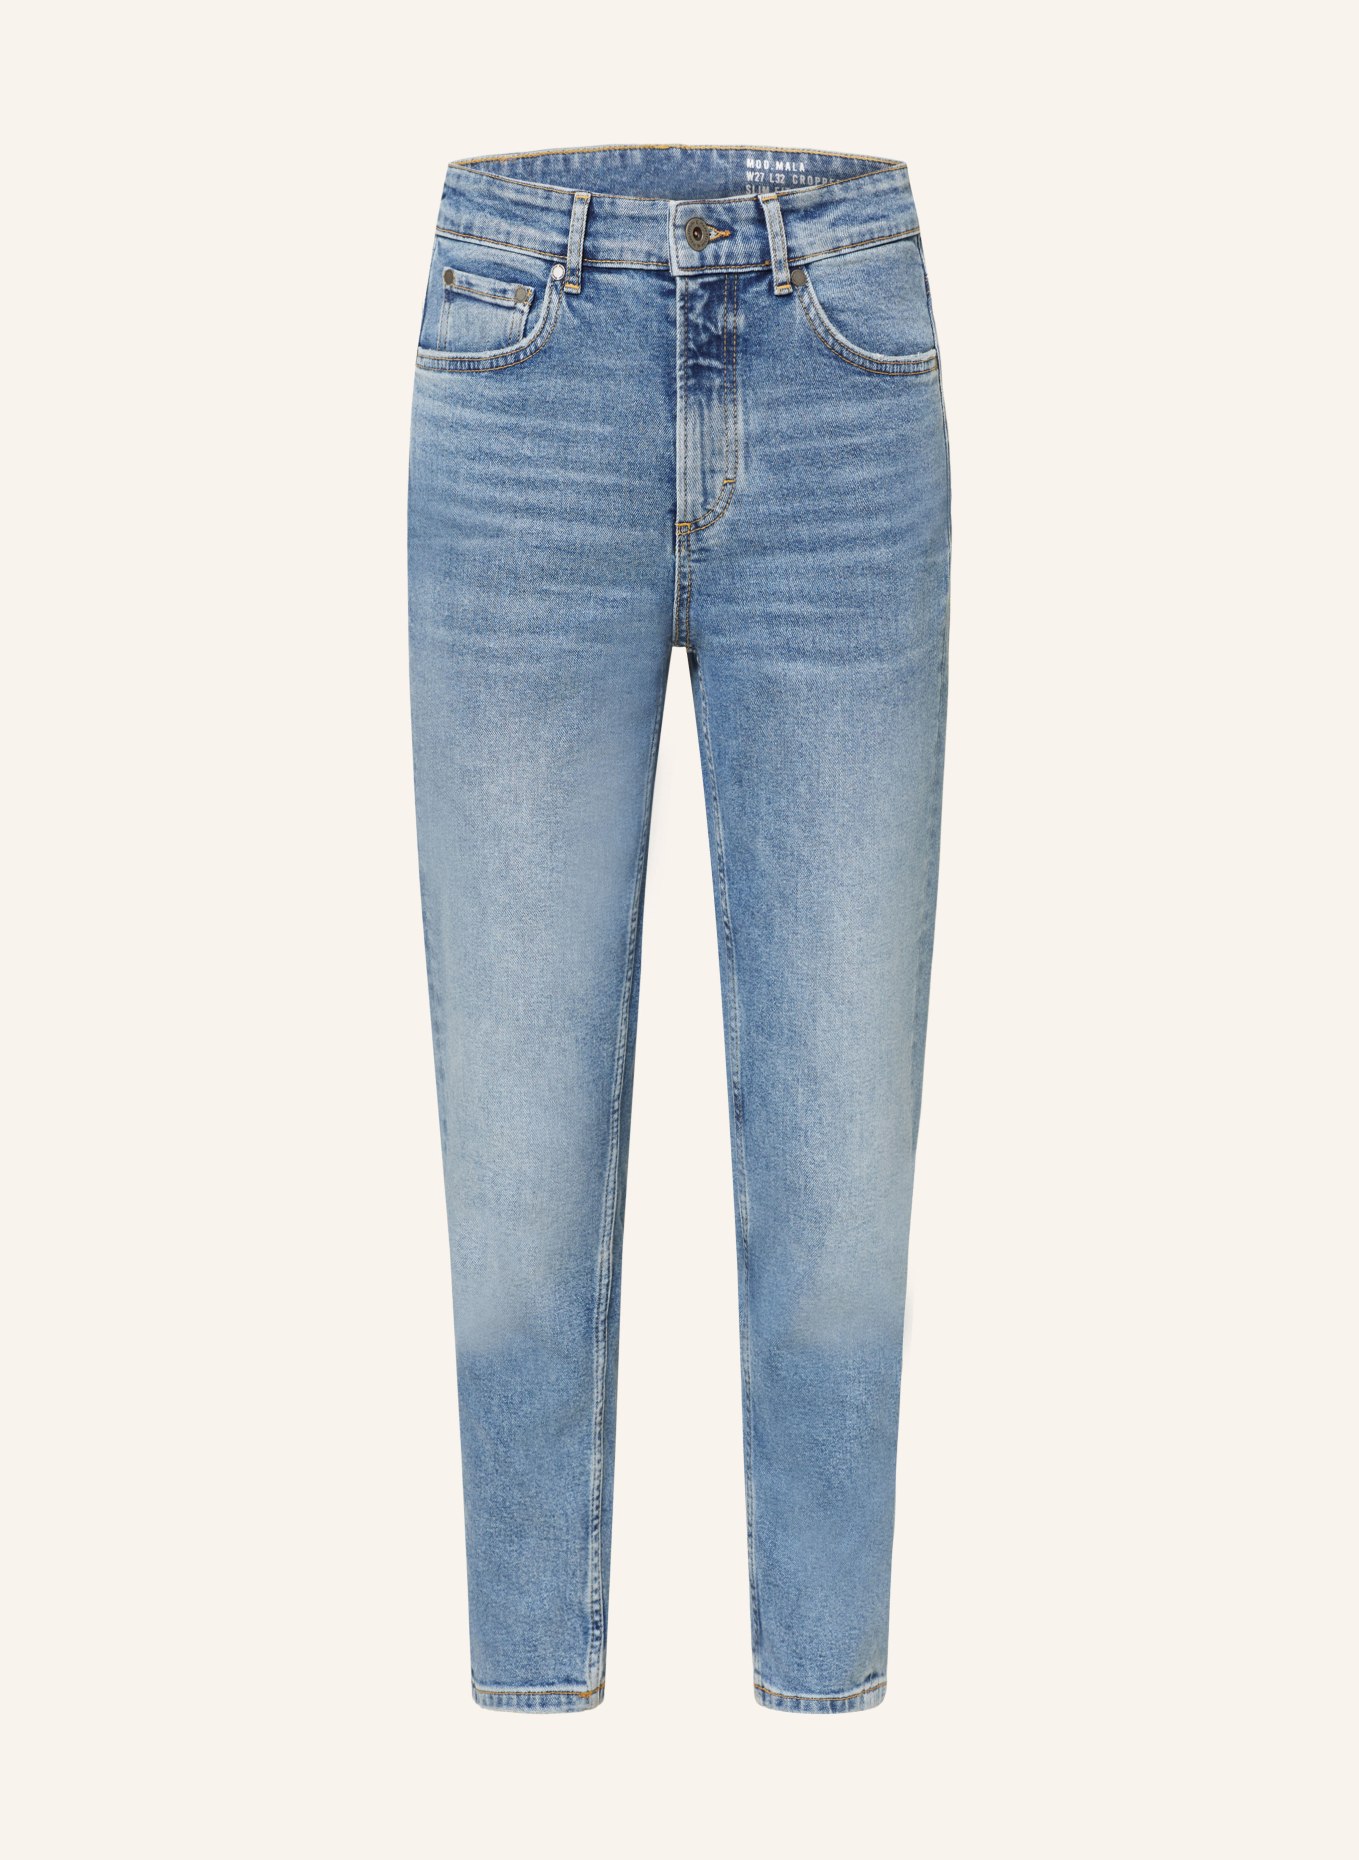 Marc O'Polo 7/8 jeans MALA, Color: 037 Mid authentic wash with grindi (Image 1)